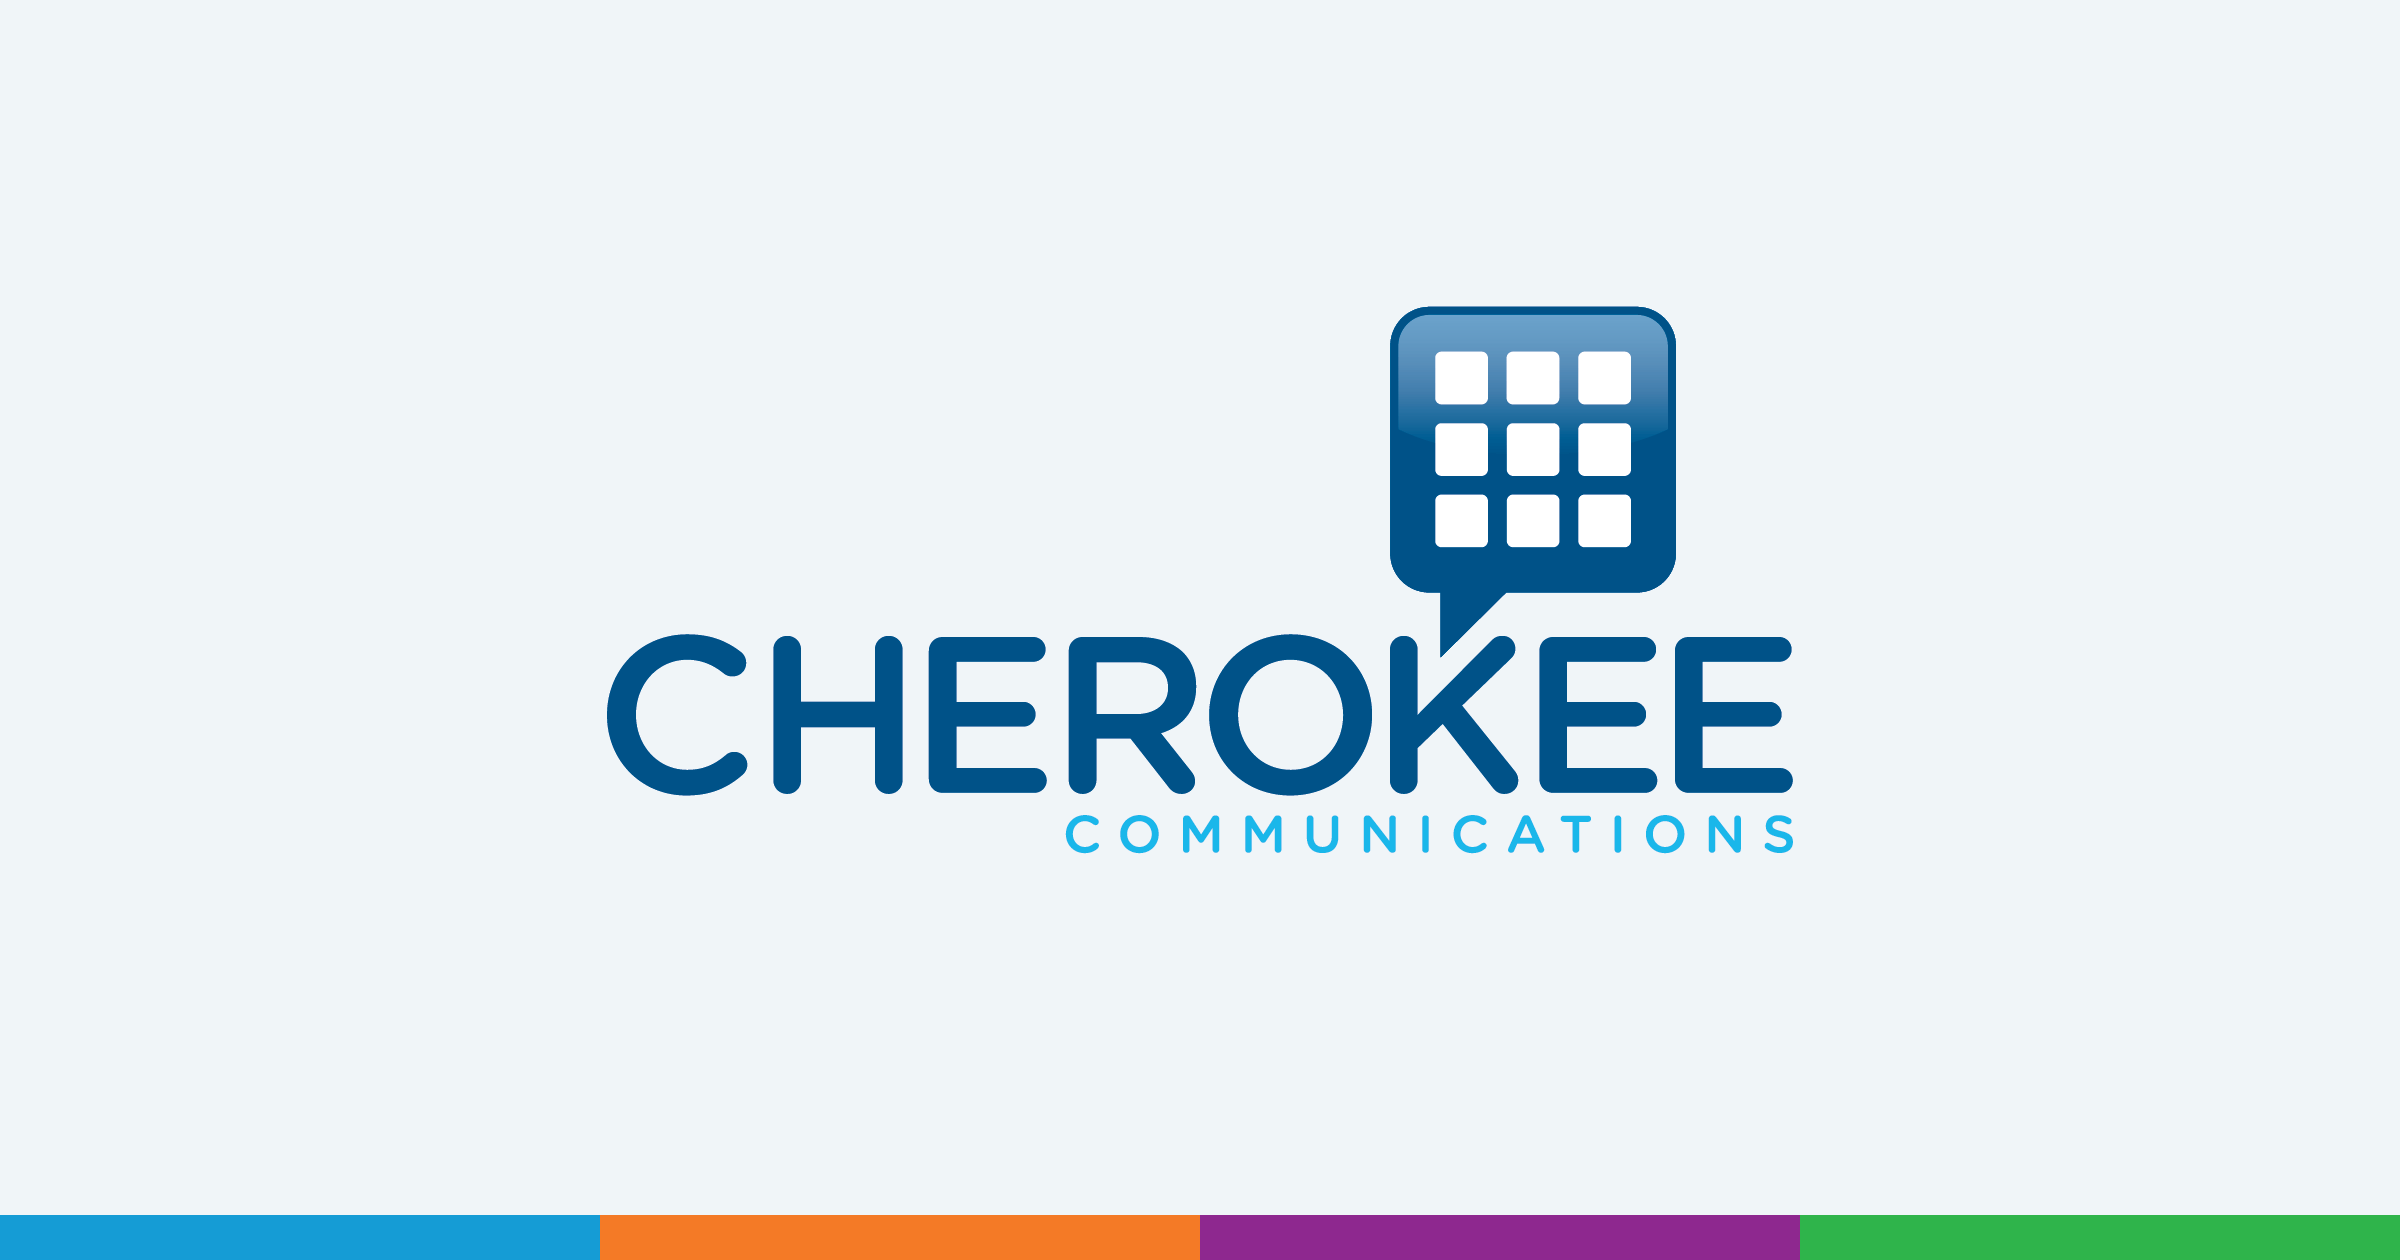 Generic Communications Logo - Cherokee Communications - Terms of Service